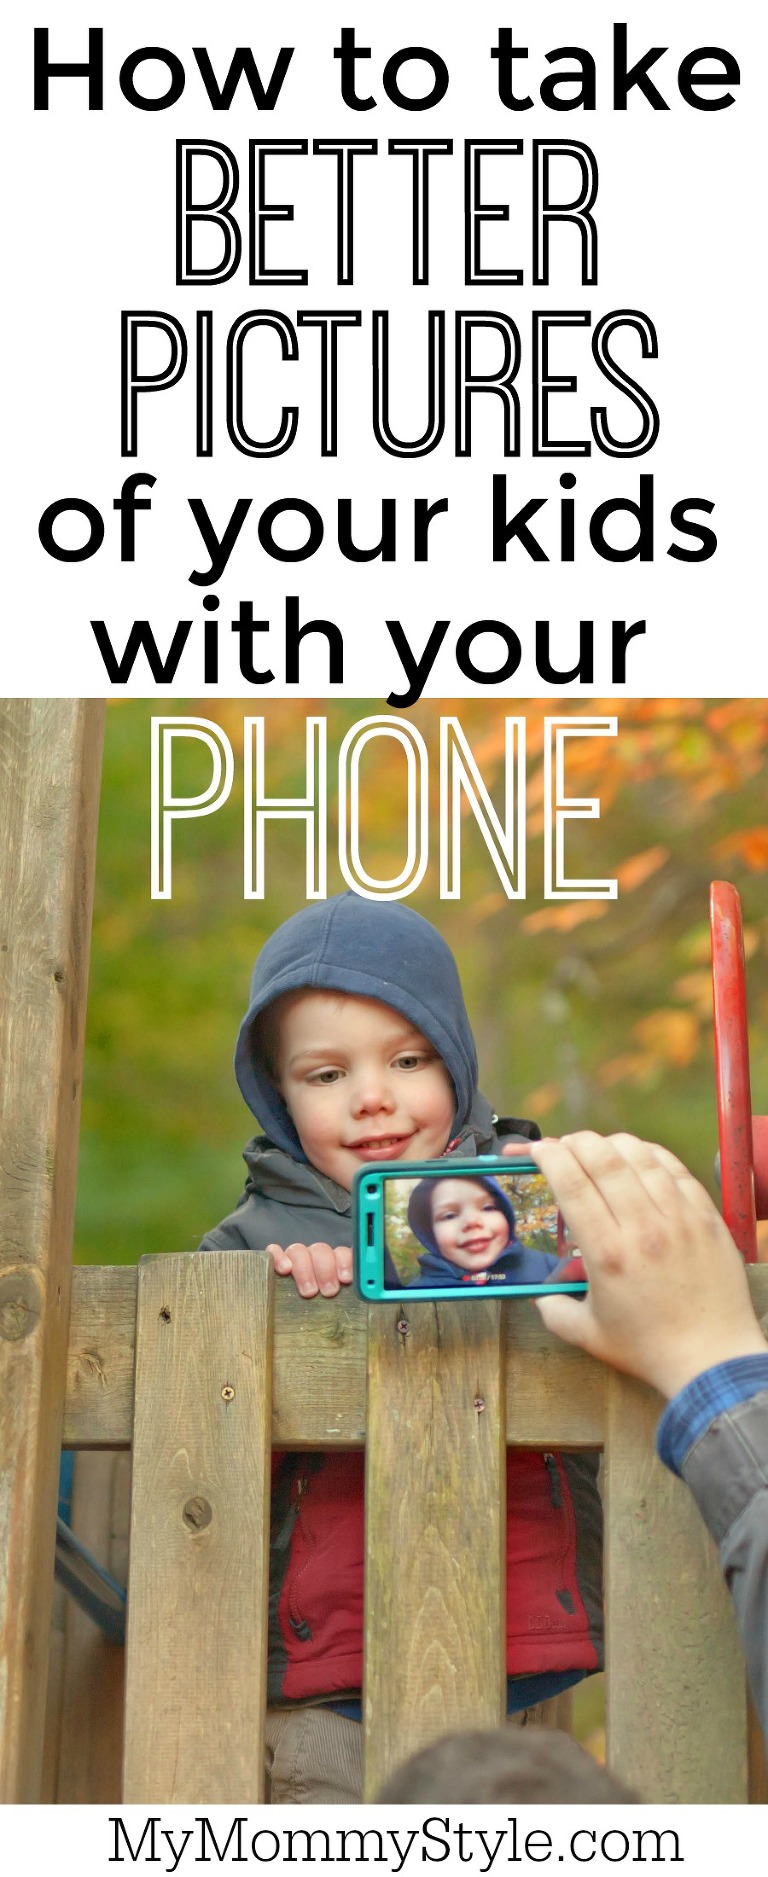 how-to-take-better-pictures-of-your-kids-with-your-phone